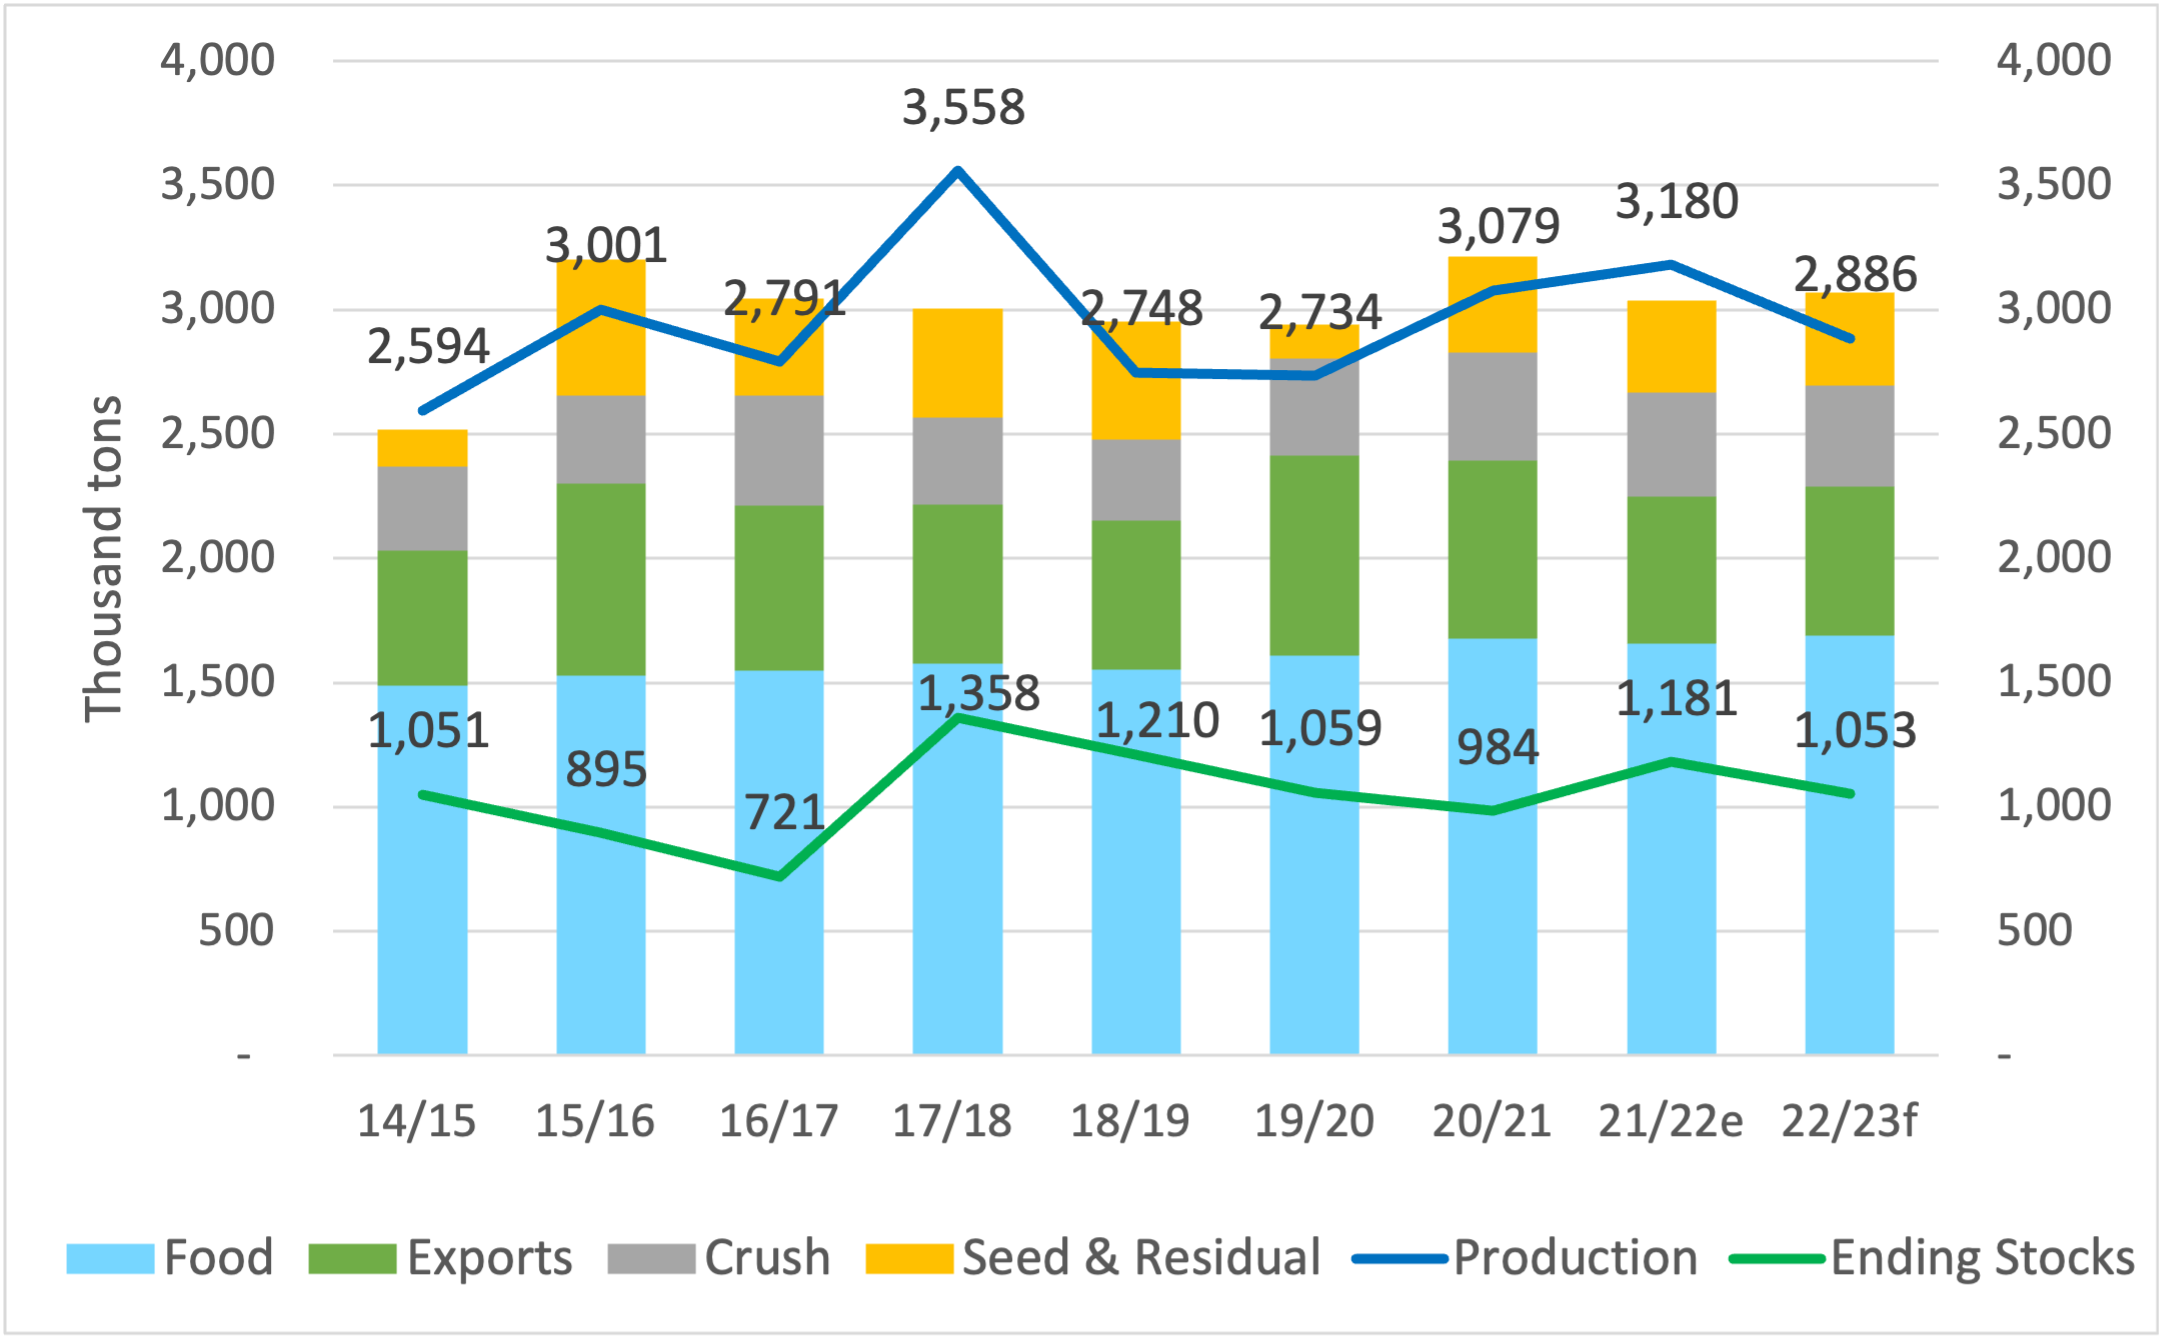 Total U.S. peanut production and ending stocks of the 2022-23 season are expected to be less than the 2021-22 season.